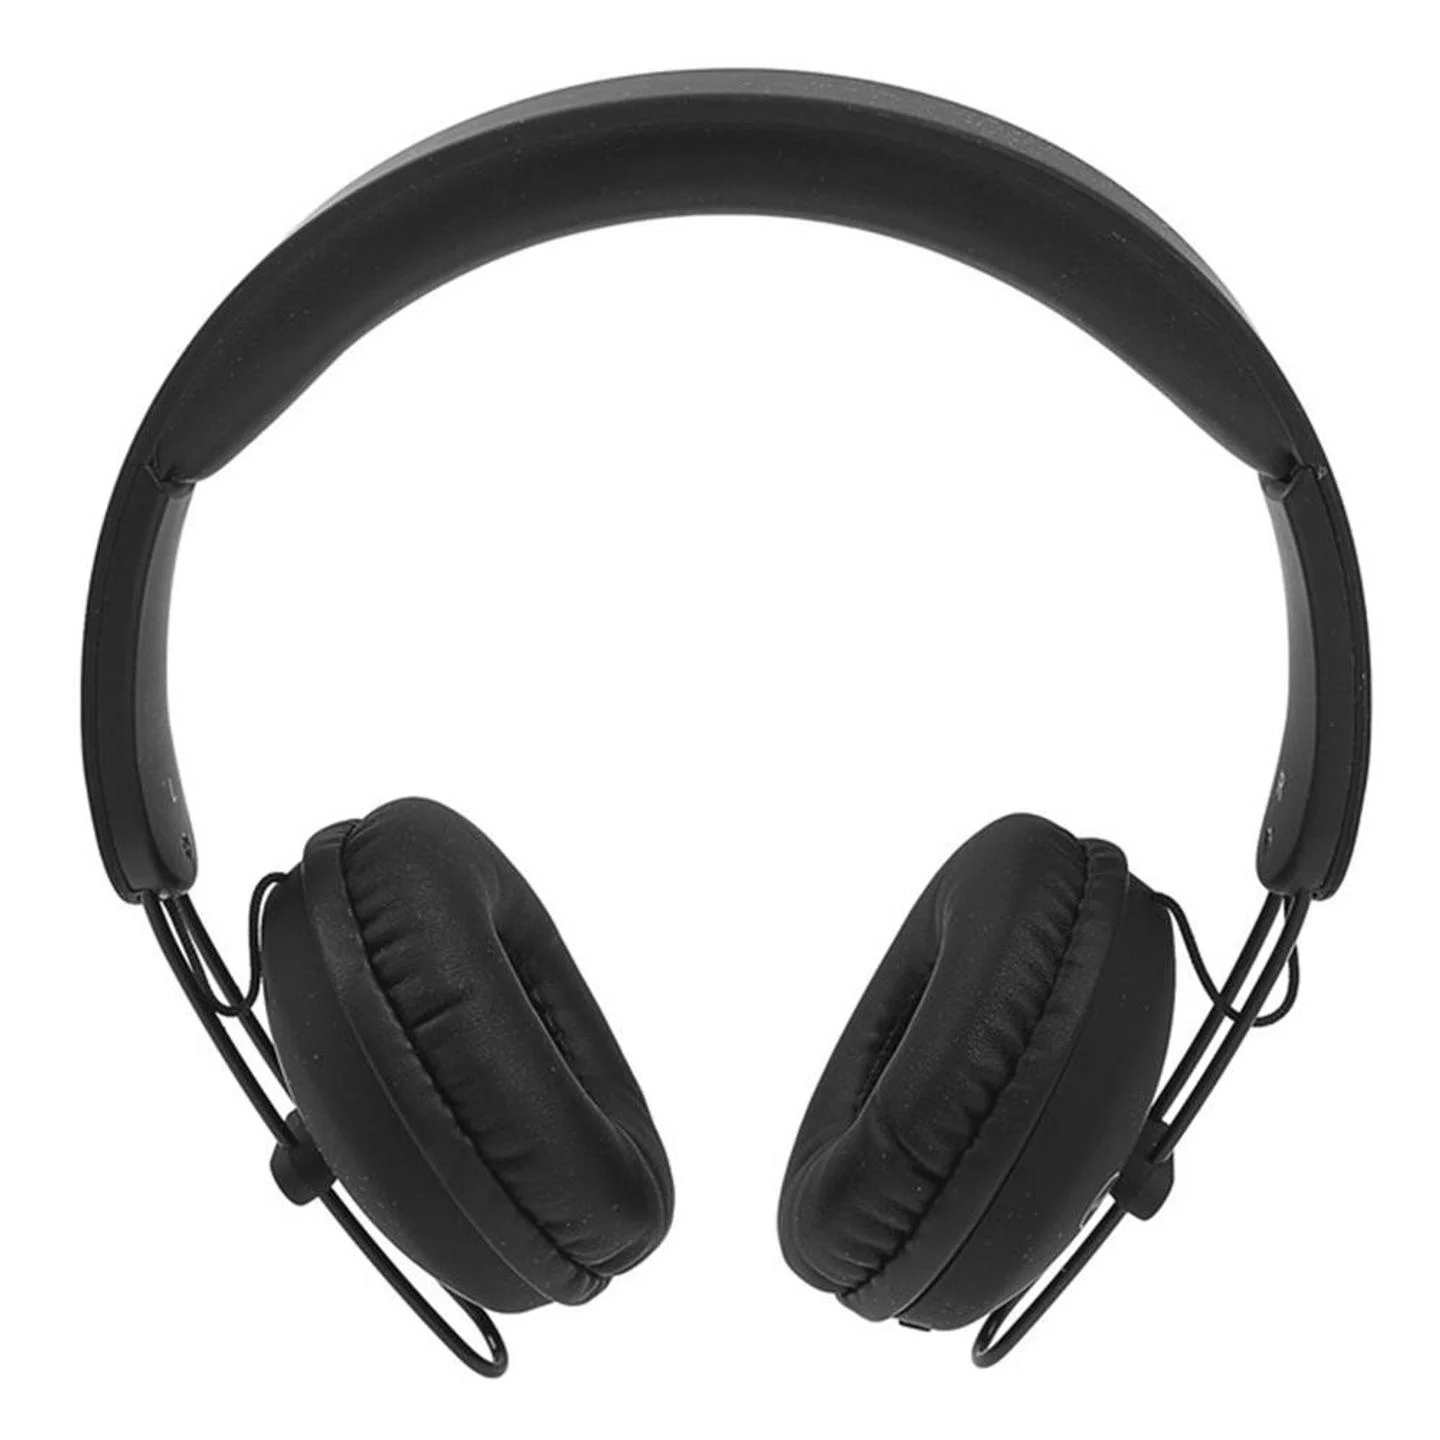 Awei A800BL head phones - wire less - Noise Cancellation